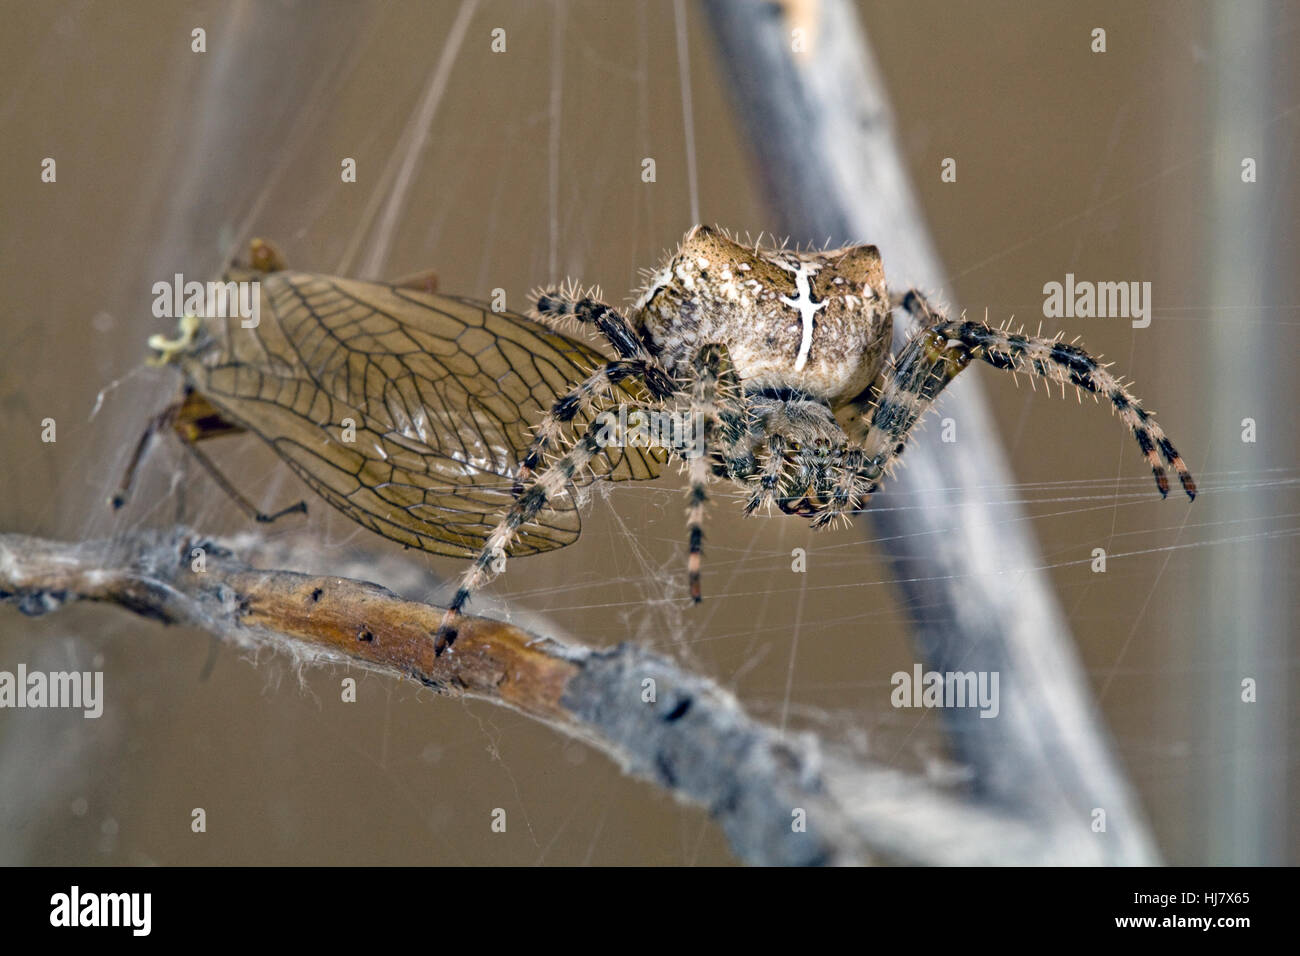 A cross orbweaver spider, Araneus diadematus, in her web with a golden stonefly she captured. Stock Photo